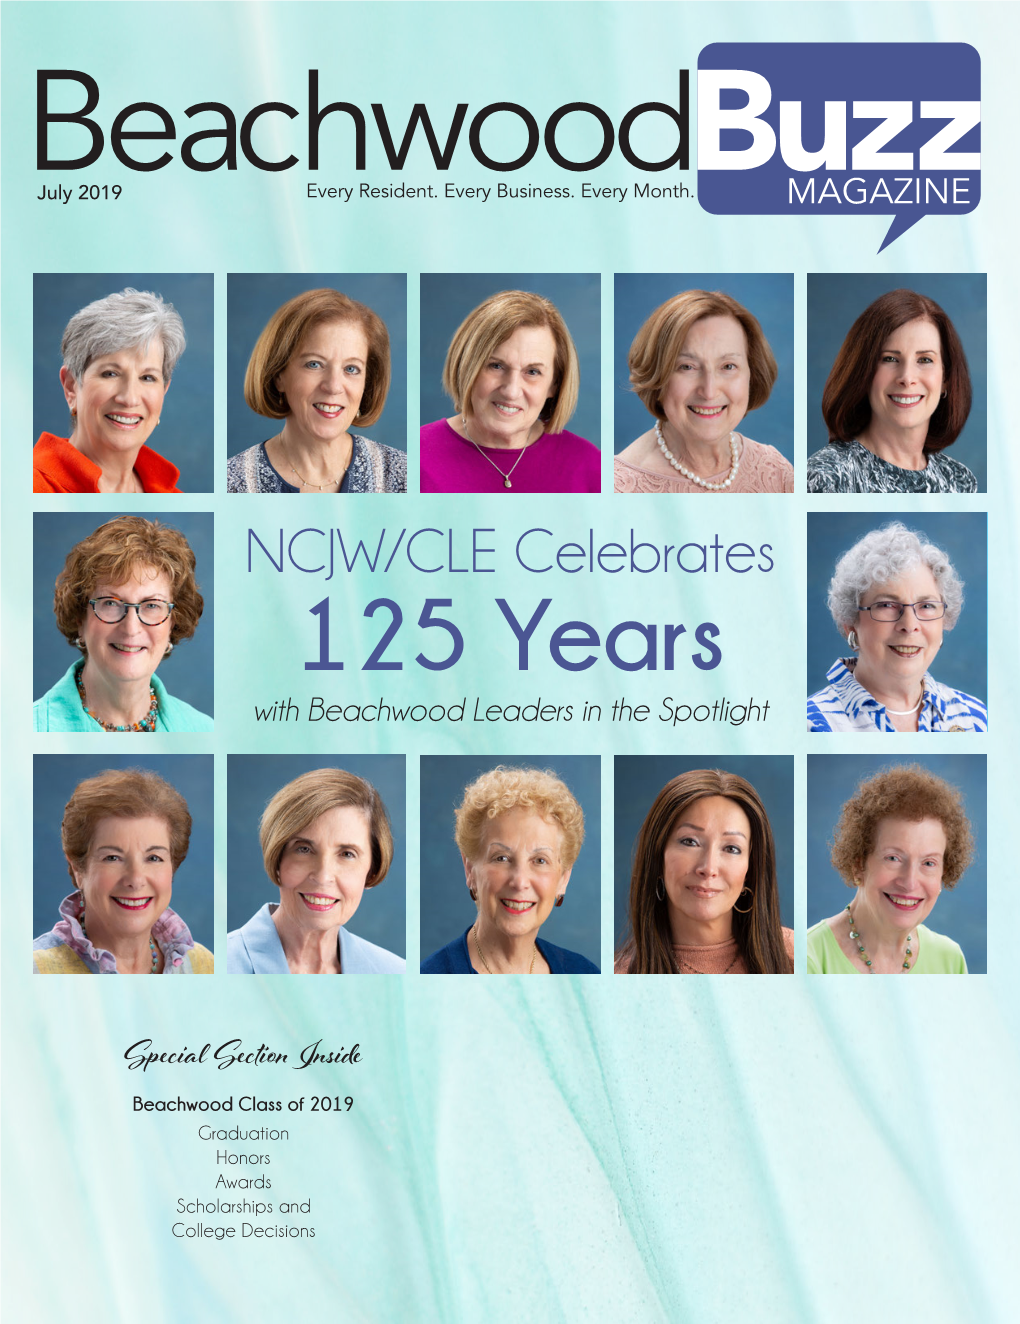 NCJW/CLE Celebrates 125 Years with Beachwood Leaders in the Spotlight